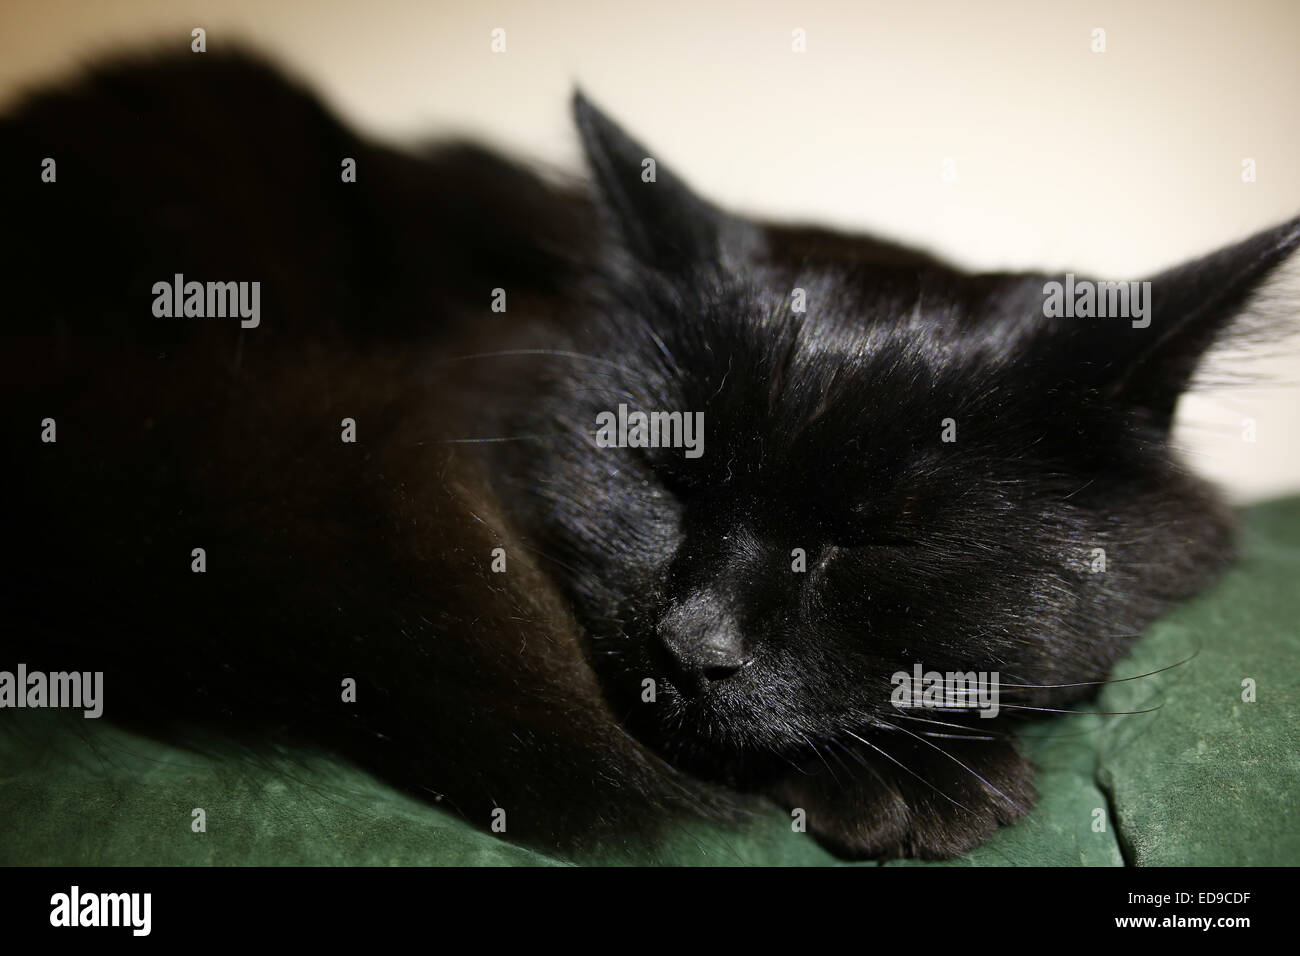 Black cat sleeping peacefully on a couch Stock Photo